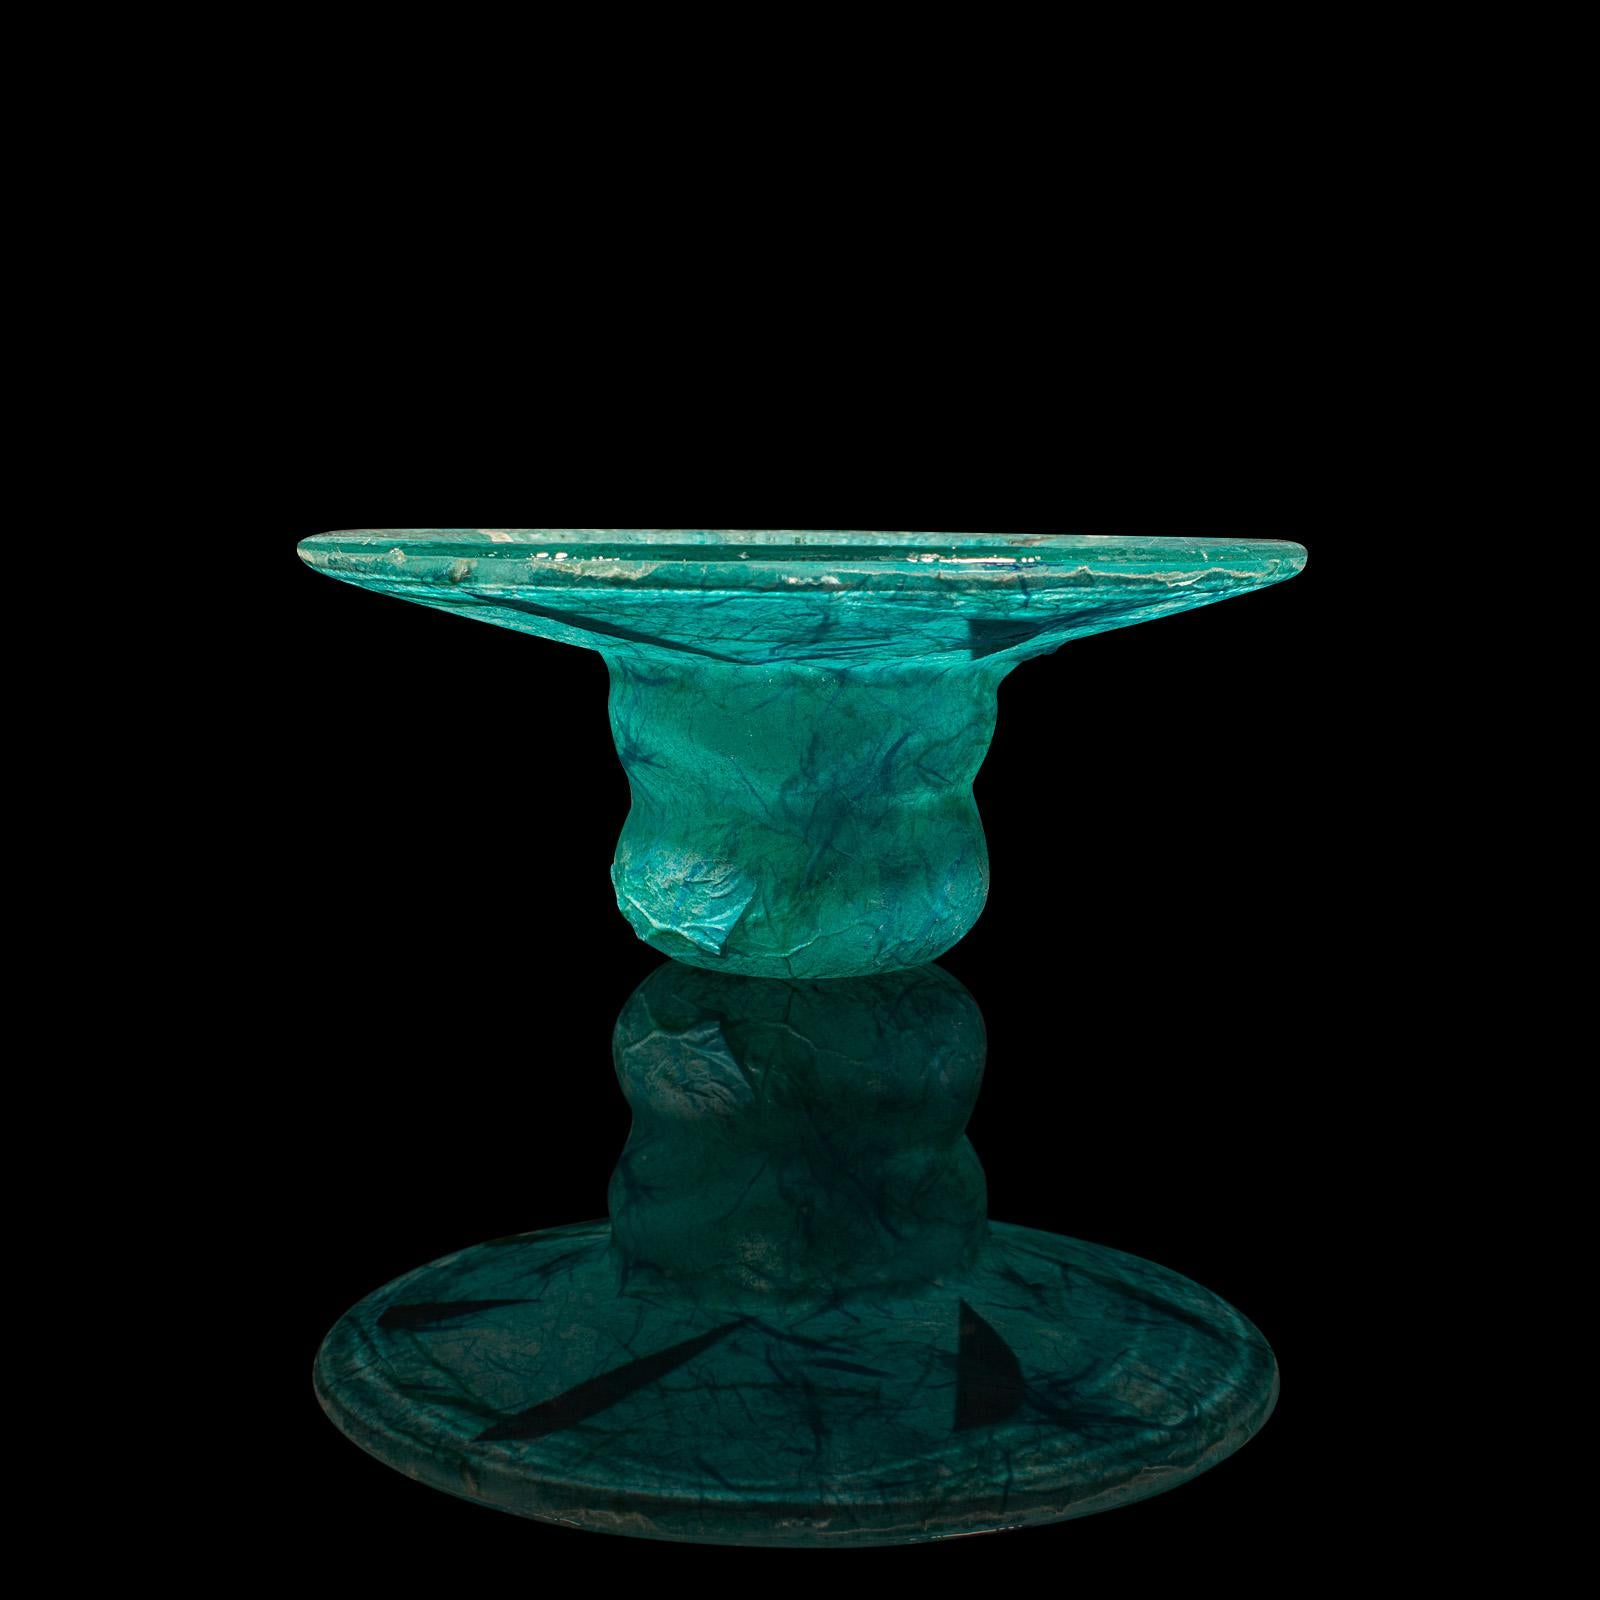 Modern Contemporary Decorative Tea Light Stand, English Art Glass, Votive Candle Holder For Sale